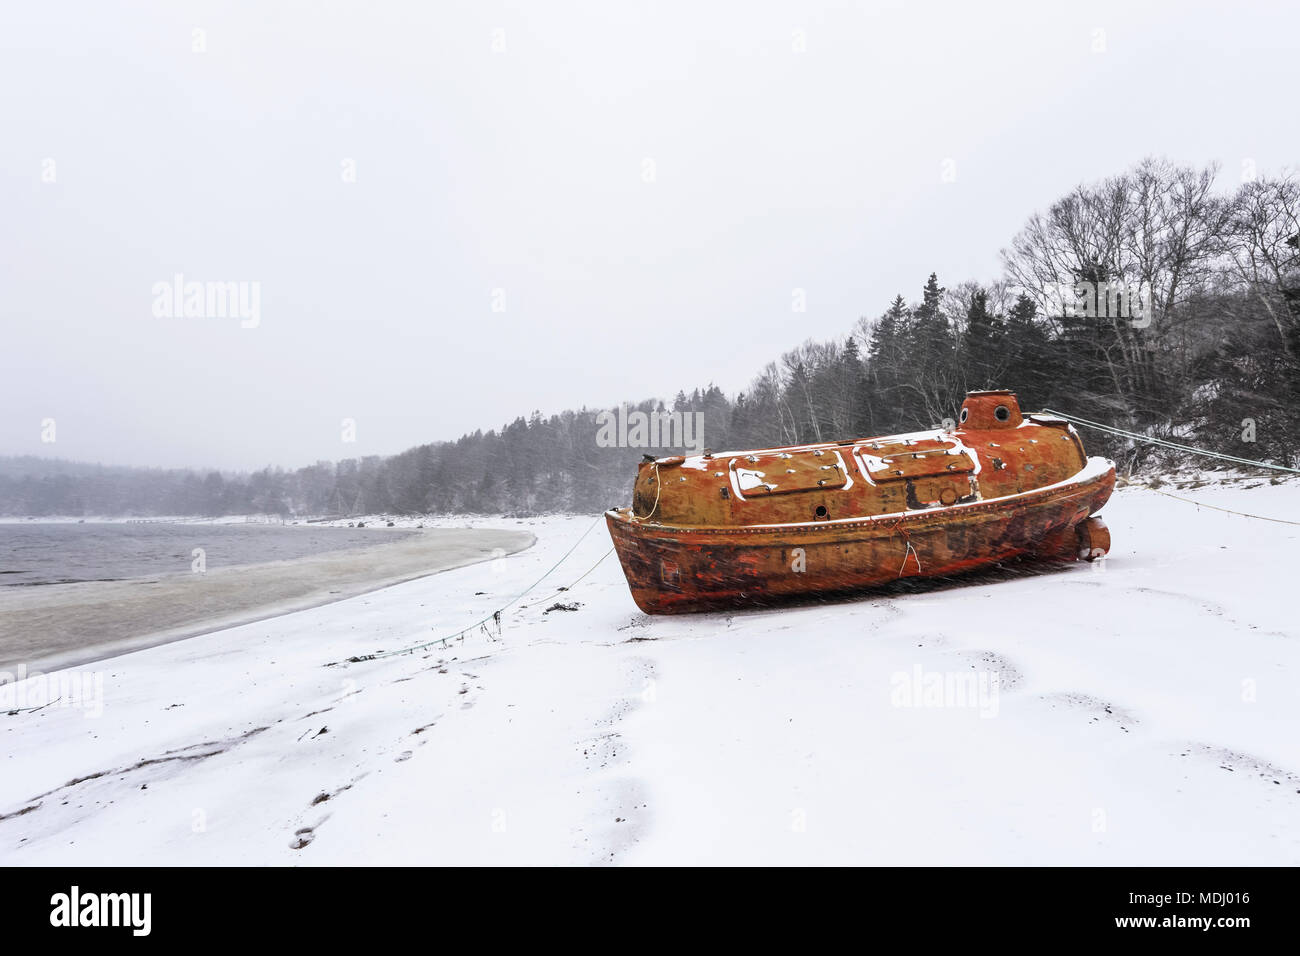 An old emergency life-boat safety vessel on the snowy shore in Sandy Cove harbour; Sandy Cove, Nova Scotia, Canada Stock Photo